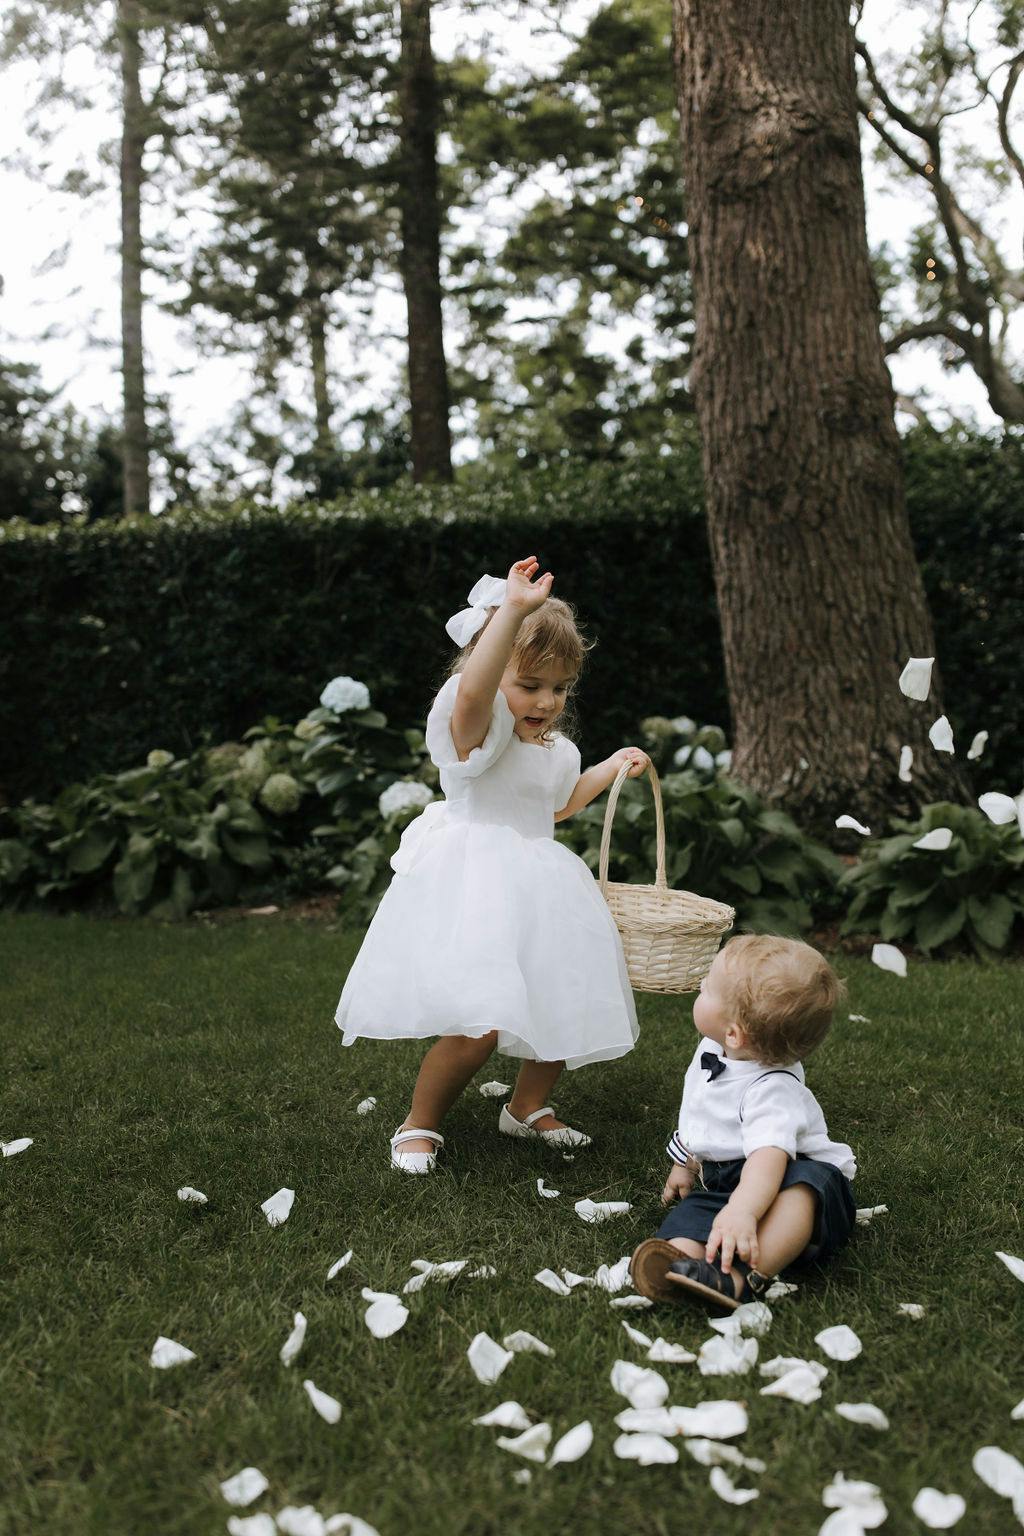 A young girl in a white dress tosses flower petals from a basket while a toddler in a white shirt and dark shorts sits on the grass, surrounded by more petals. They are in an outdoor garden area with trees and greenery in the background.